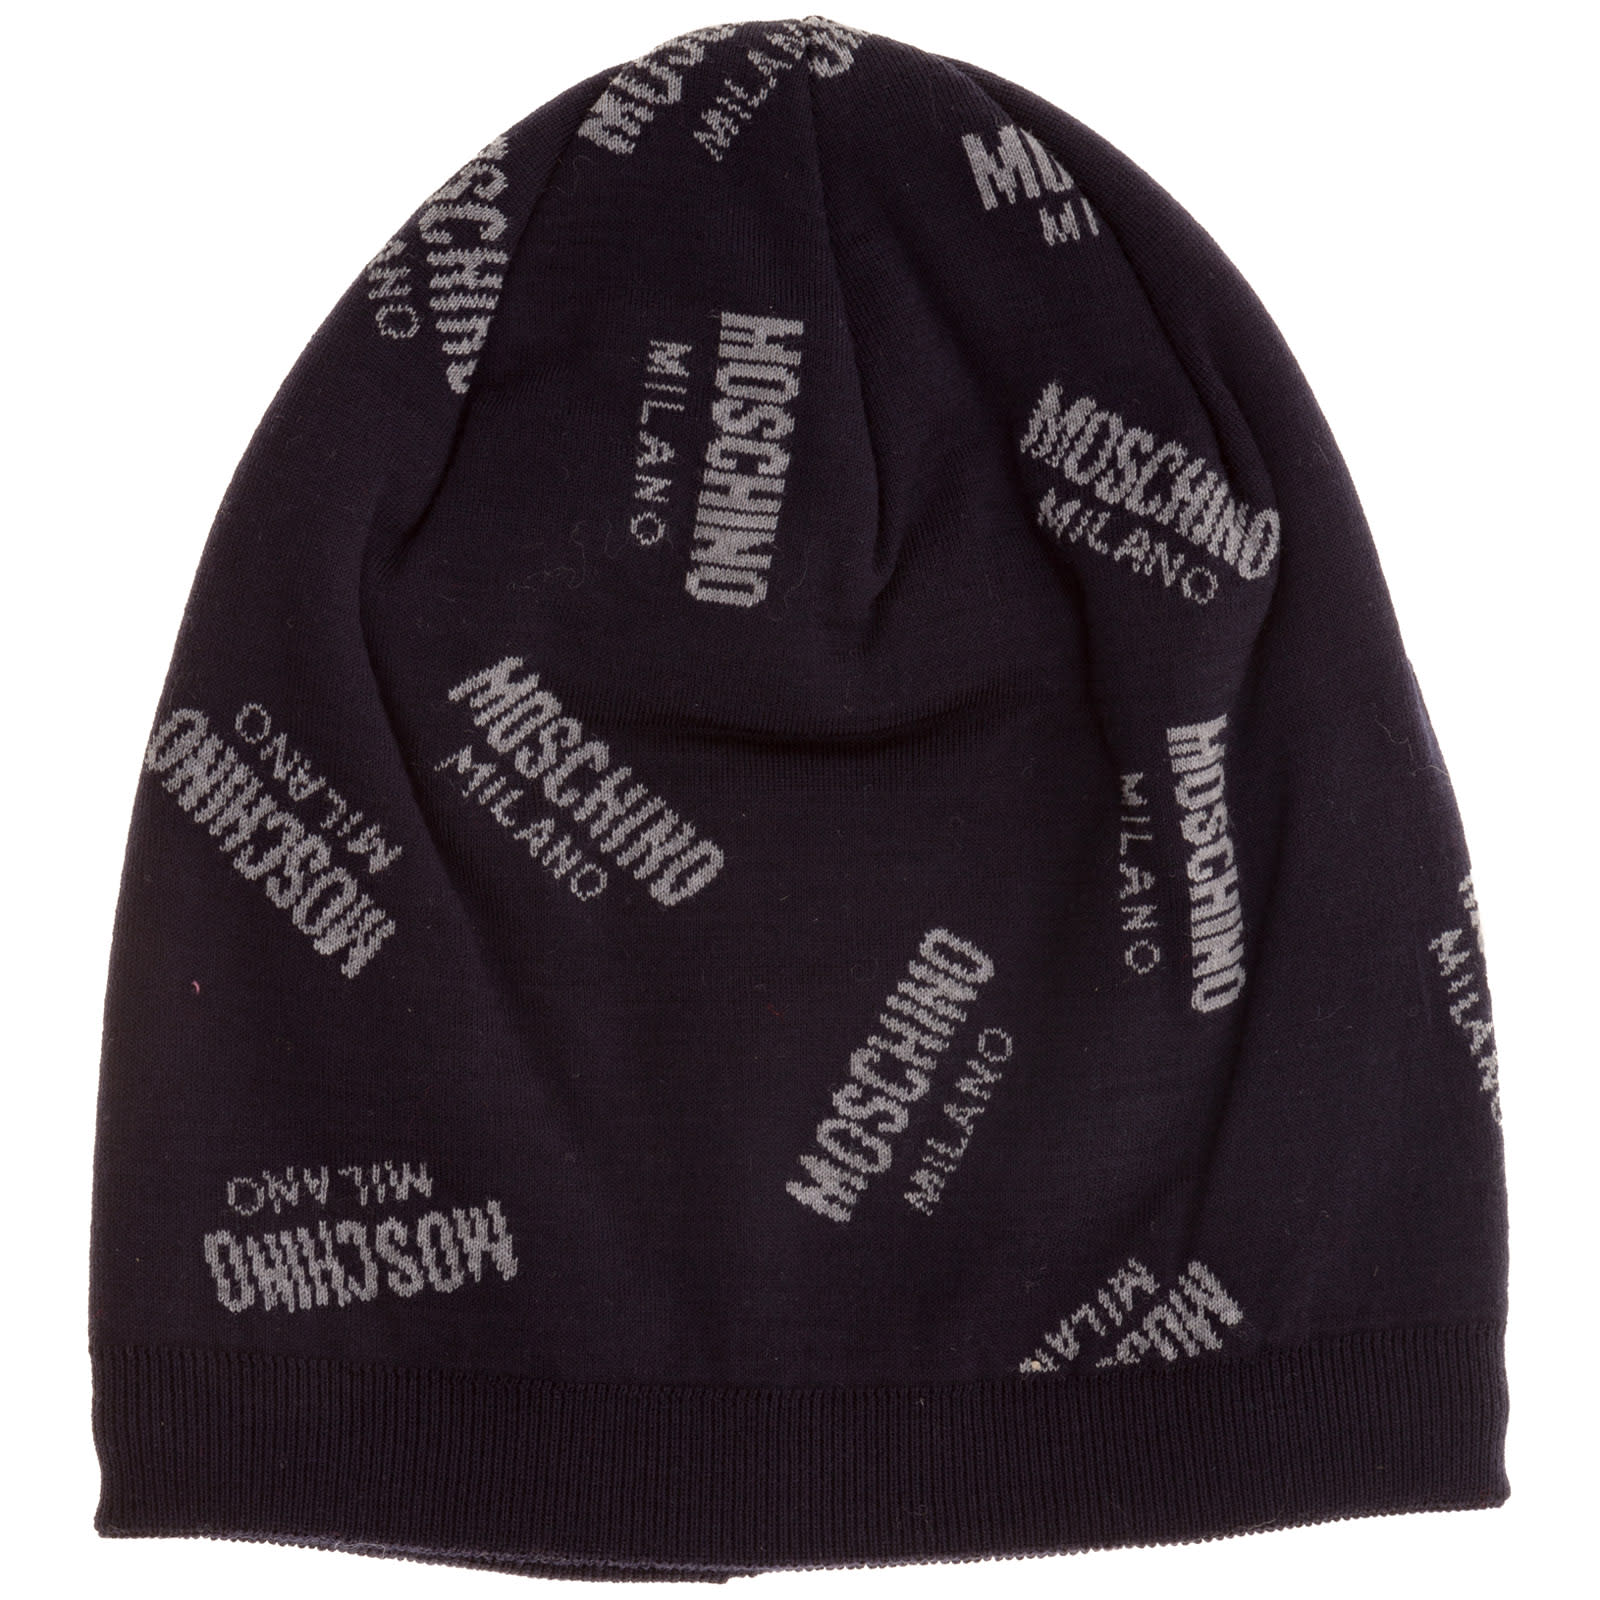 MOSCHINO DOUBLE QUESTION MARK BEANIE,M525060043013